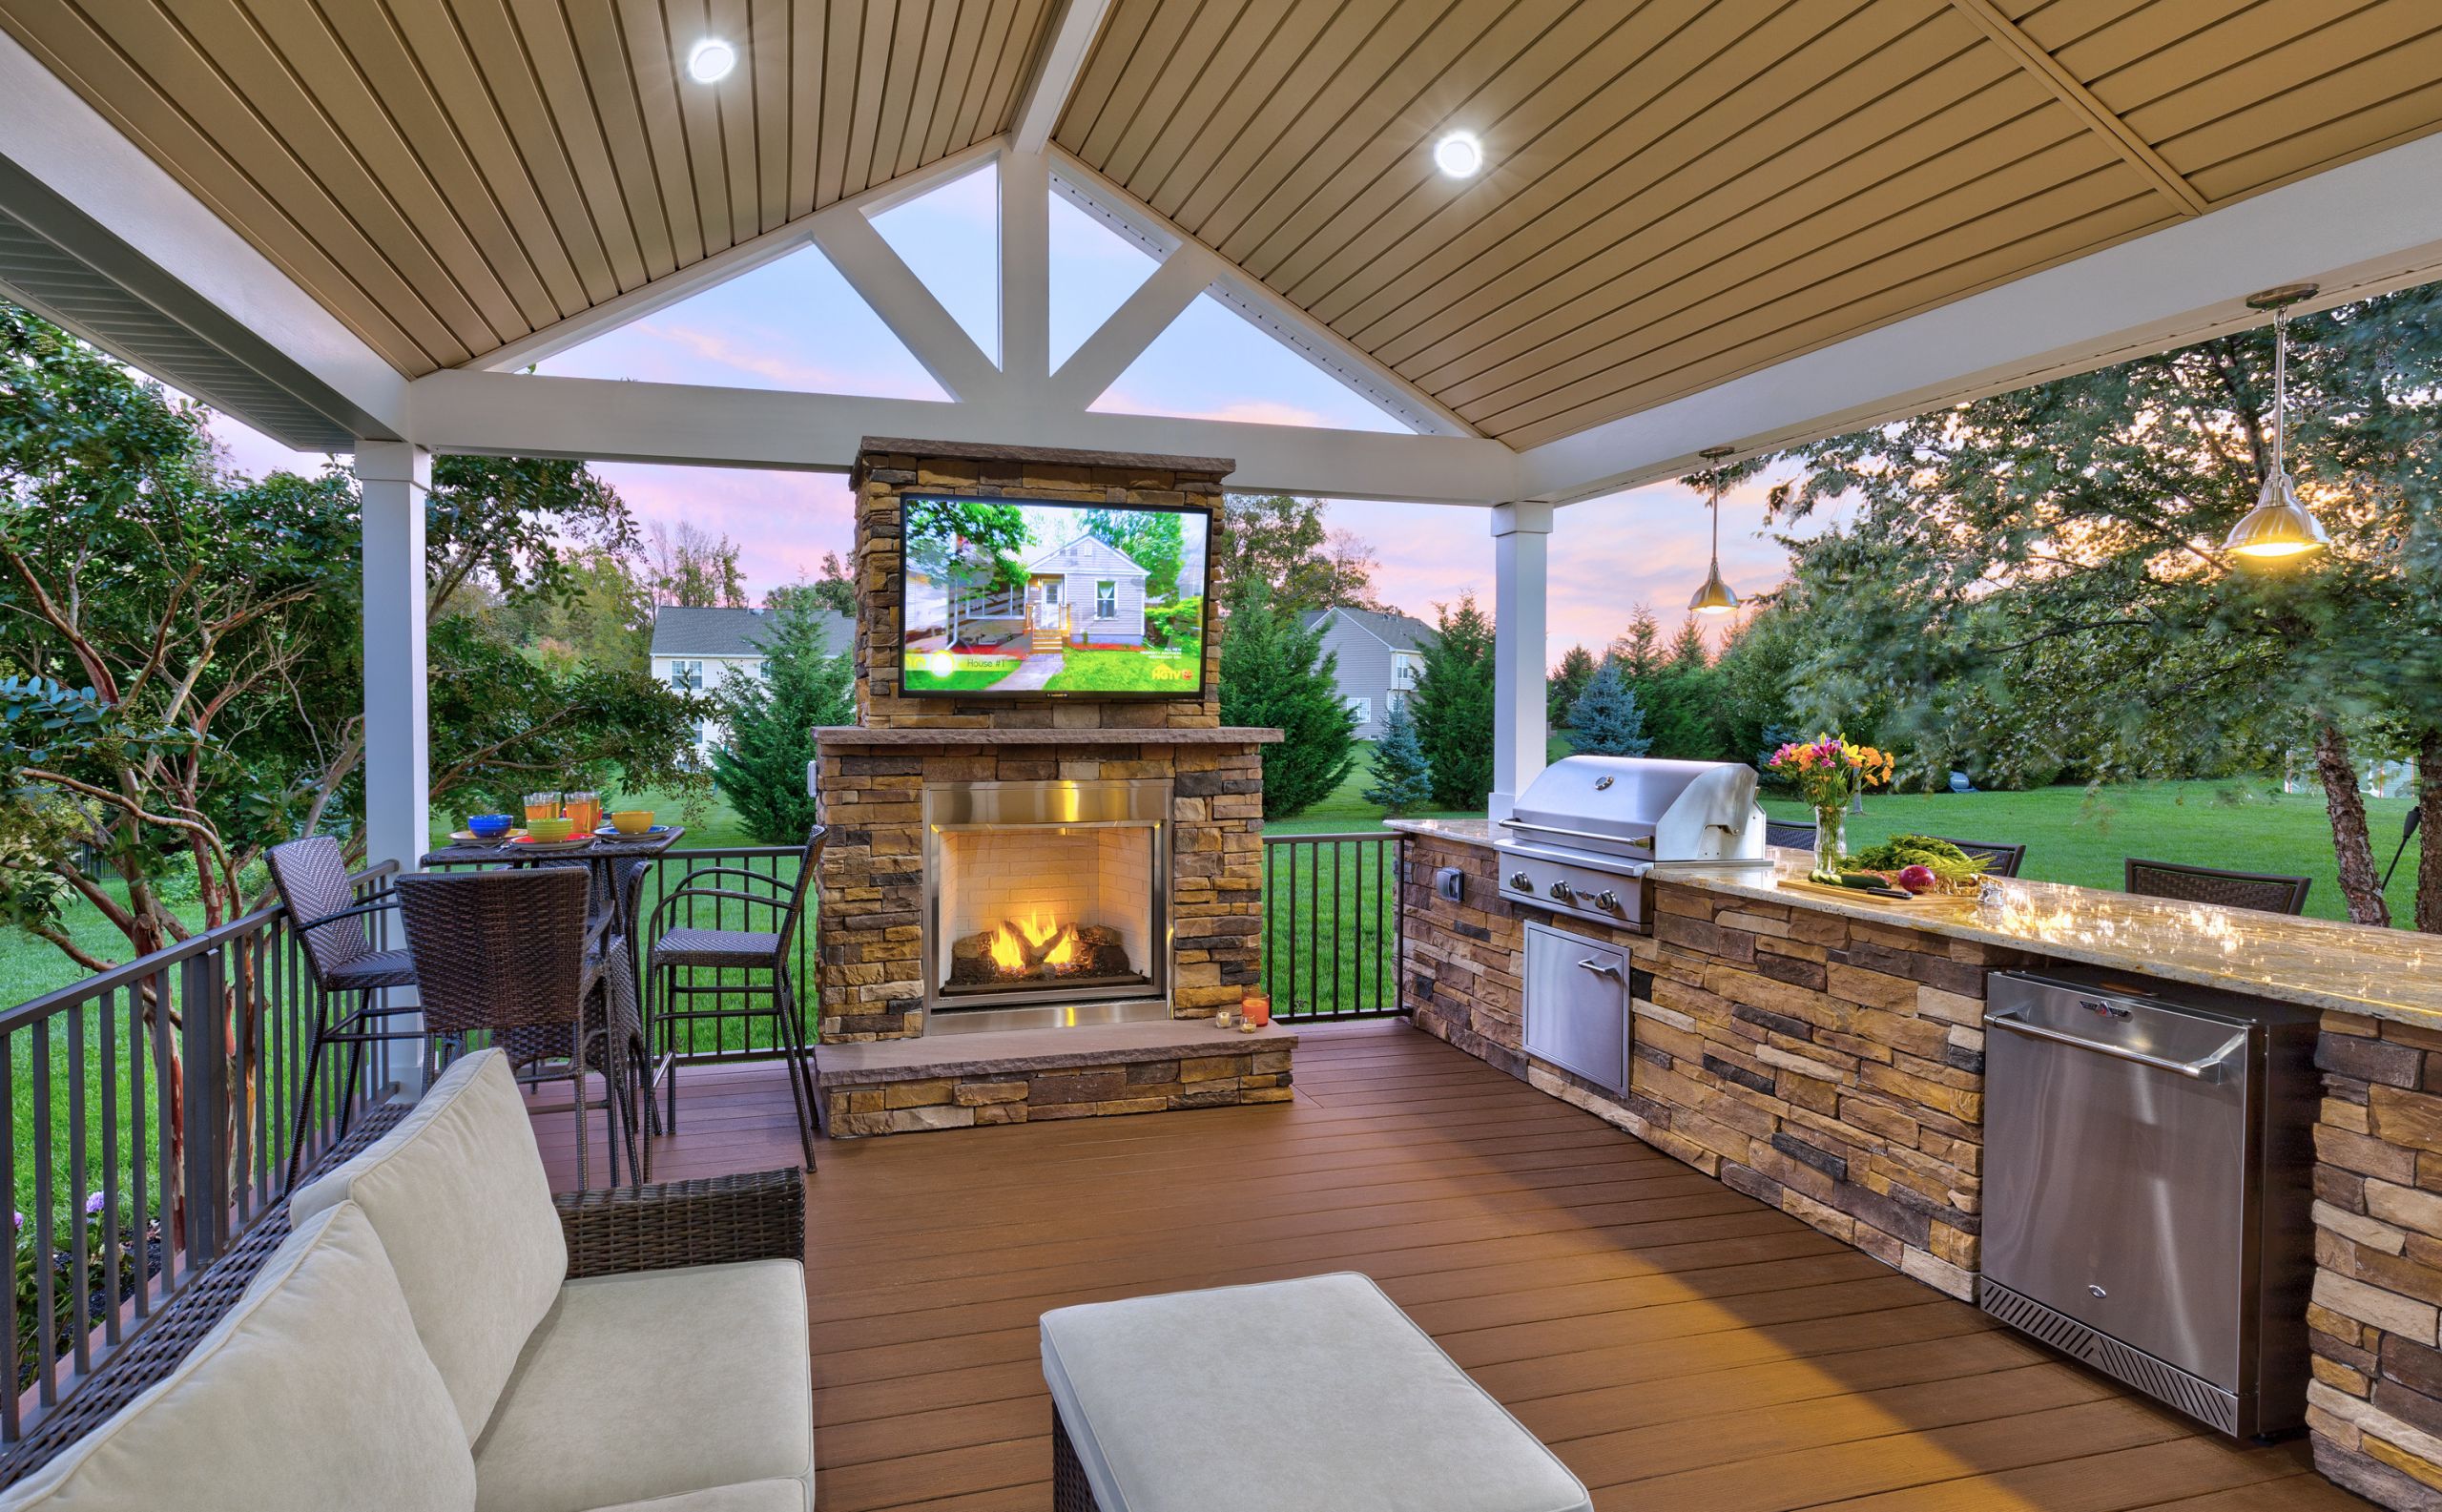 Outdoor Kitchen With Fireplace
 Outdoor Fire Pit Designers Delaware